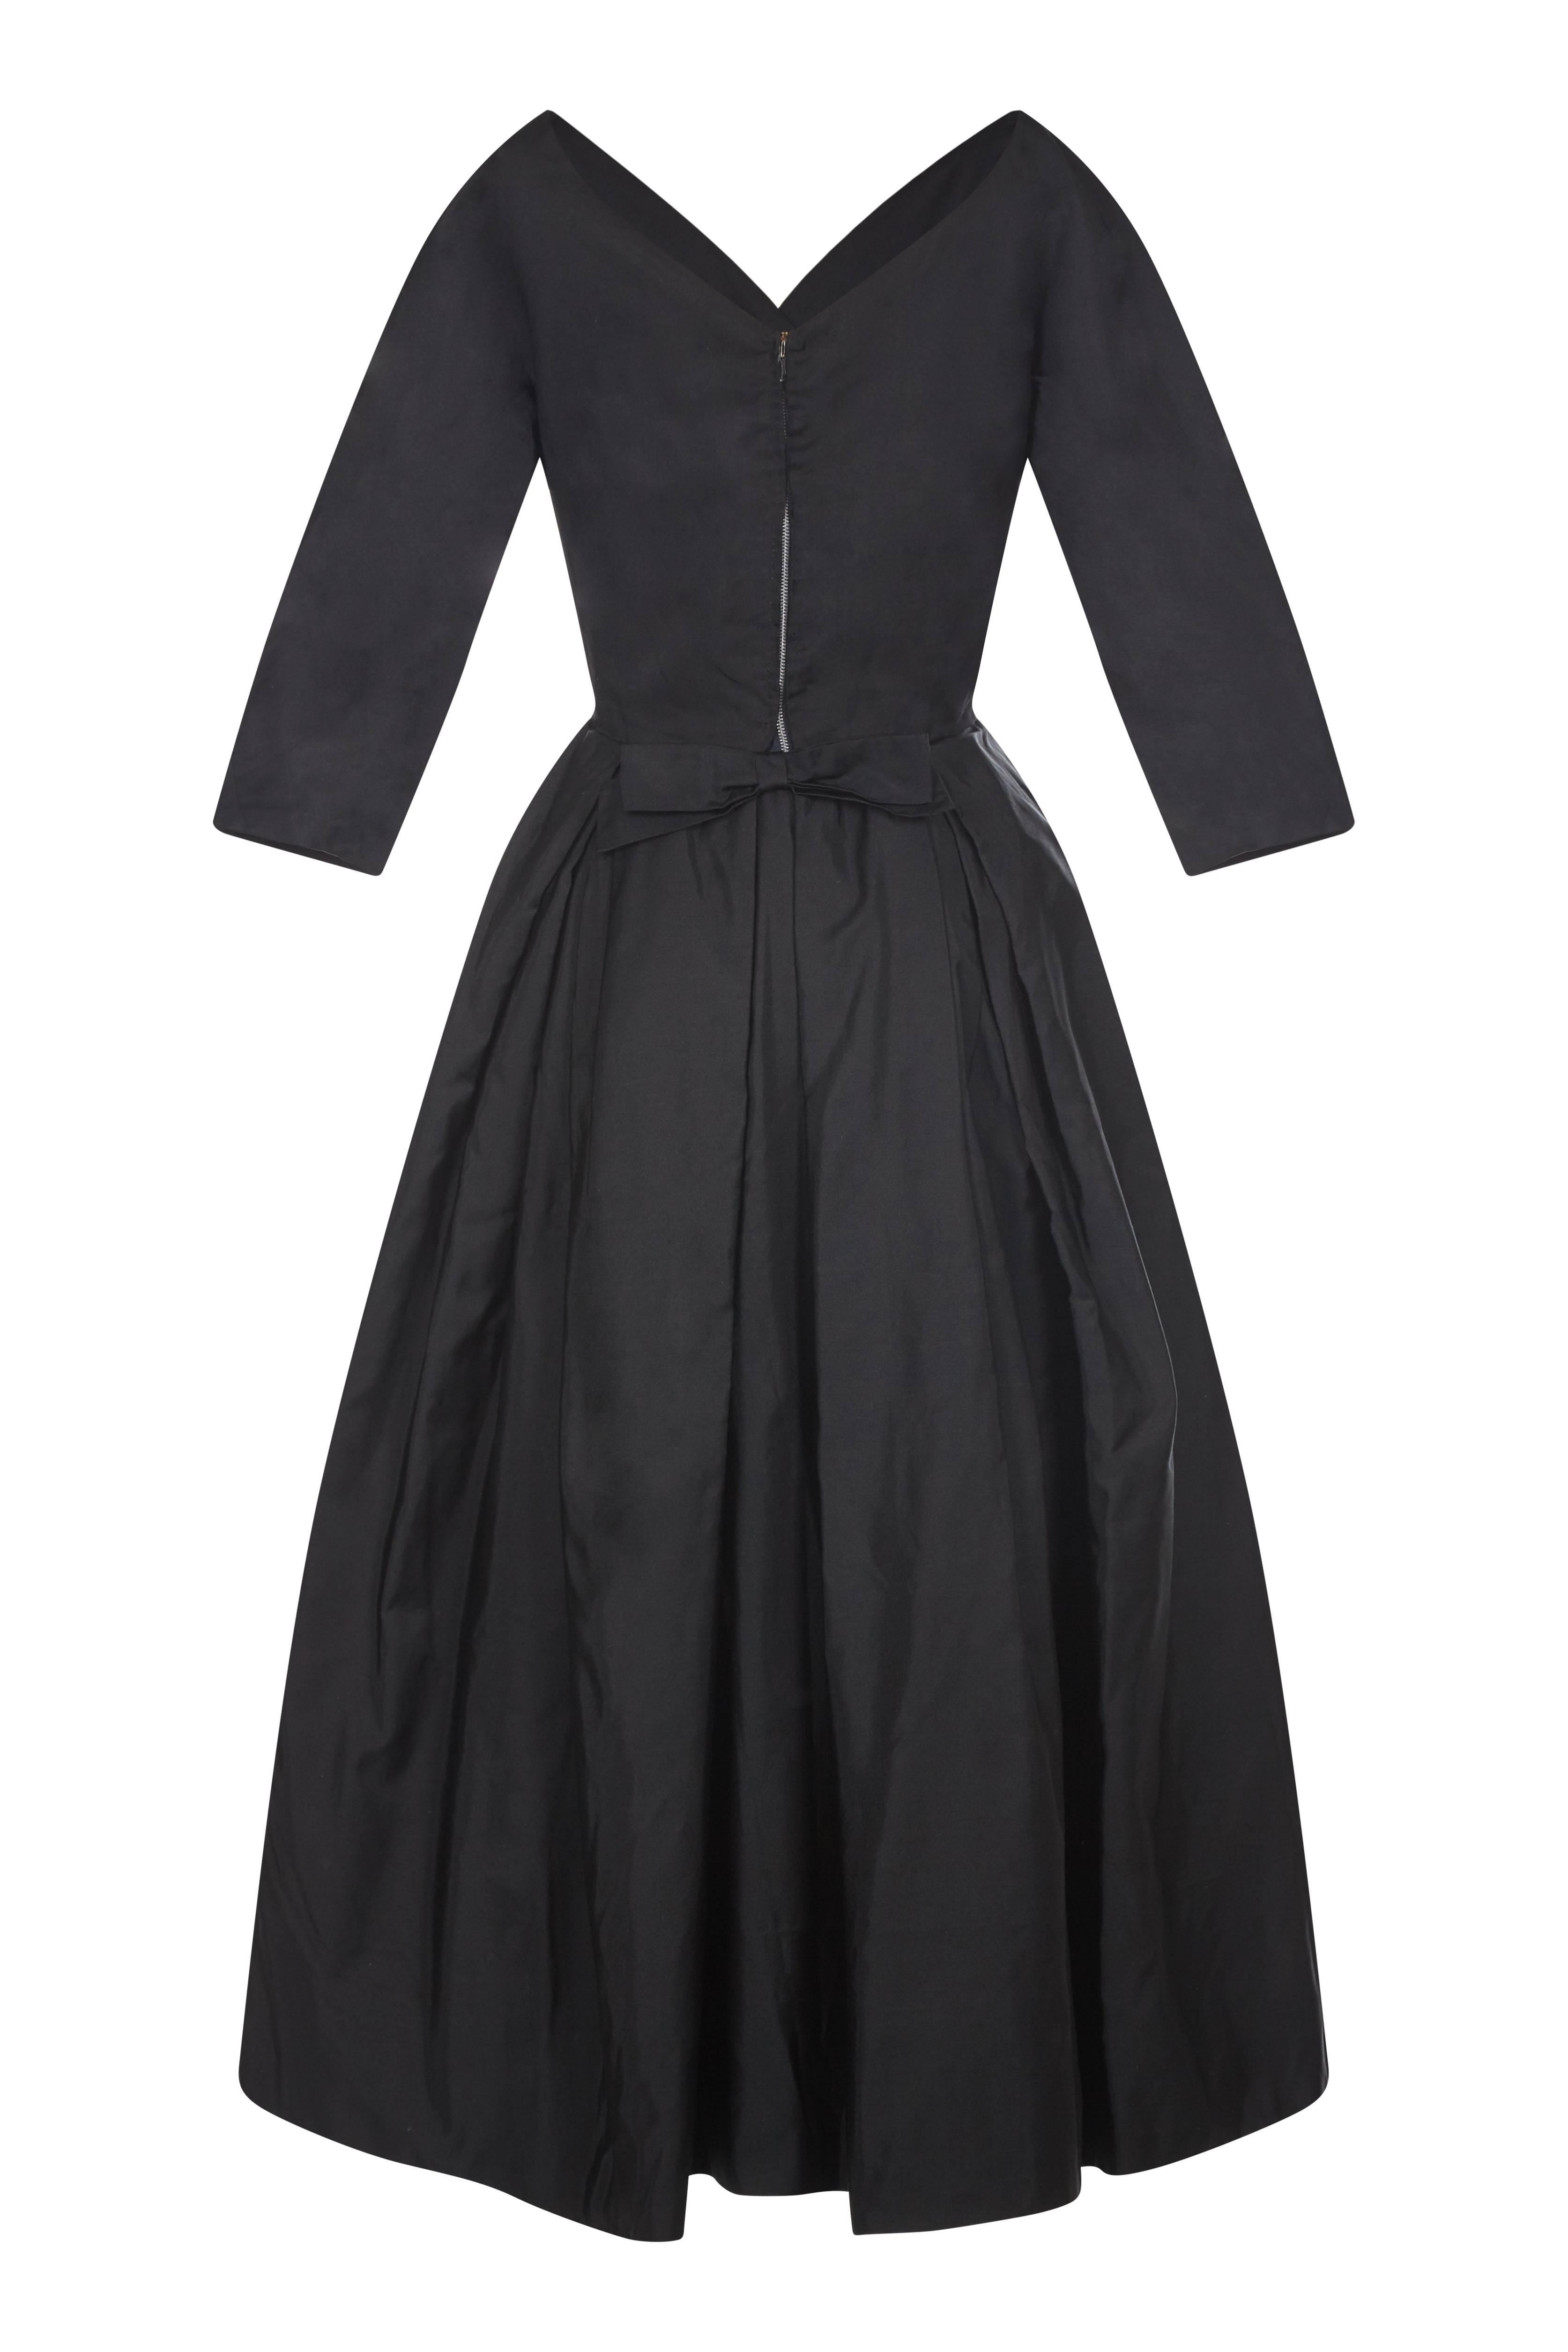 This exquisite 1950s Jean Wurtz black silk dress is a rare piece of couture of exceptional quality and style. The luxurious thick silk overlay, delicate waistline and lavishly designed skirt makes this a striking example of the elegant New Look era.